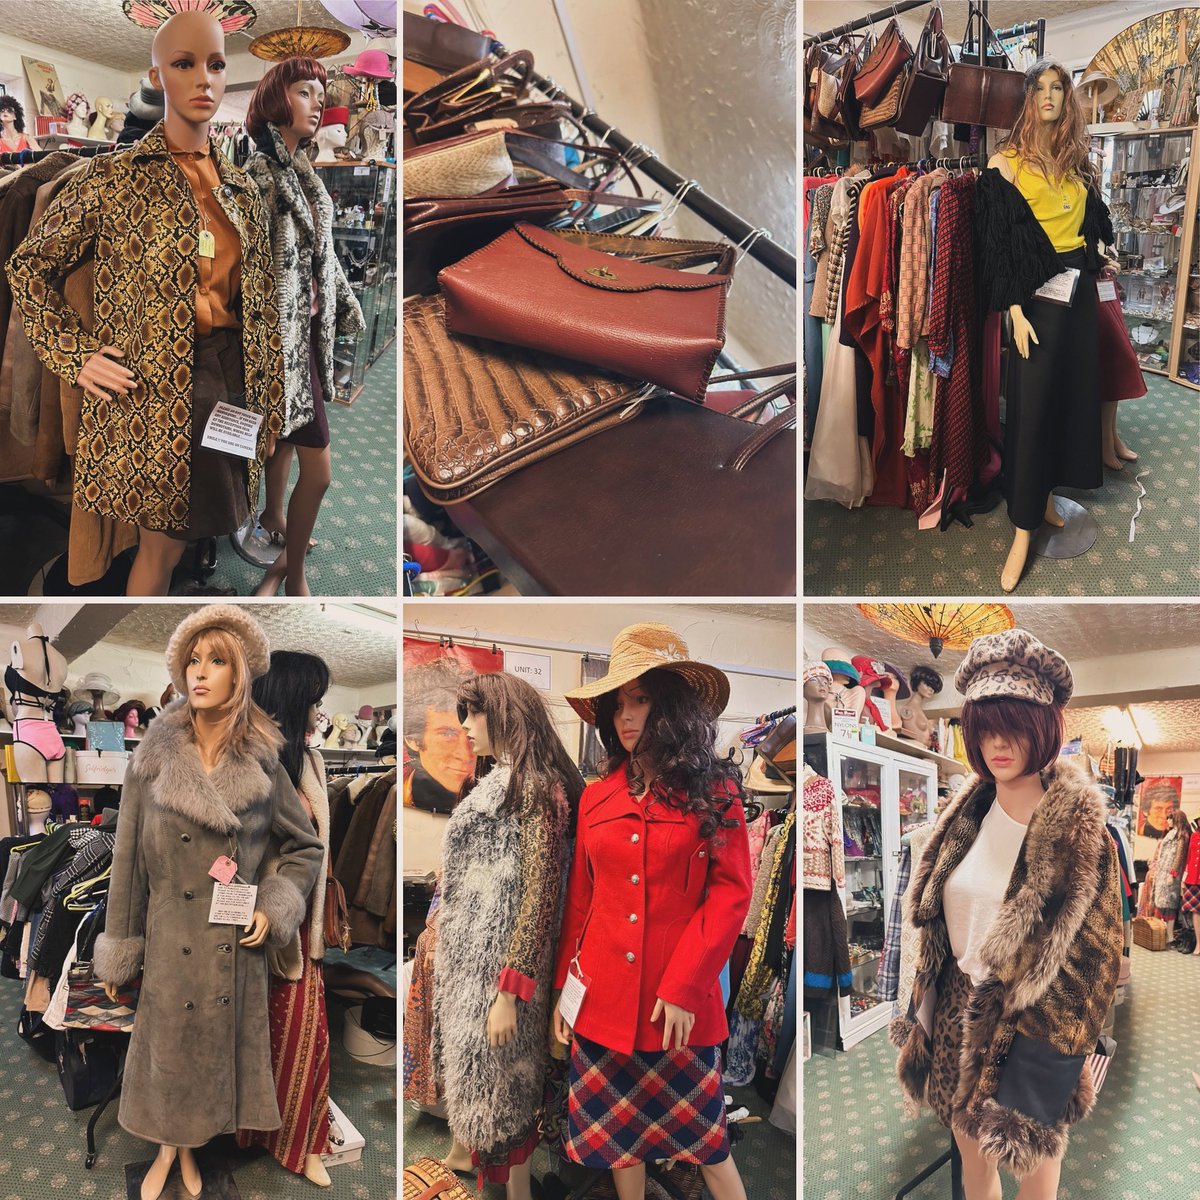 Good morning! The vintage folk will be ready to greet you all from 10-5pm 
#vintageclothes #vintagefashion #vintagedresses #vintagecoats #mensvintageclothes #ladiesvintageclothes #astraantiquescentre #hemswell #lincolnshire